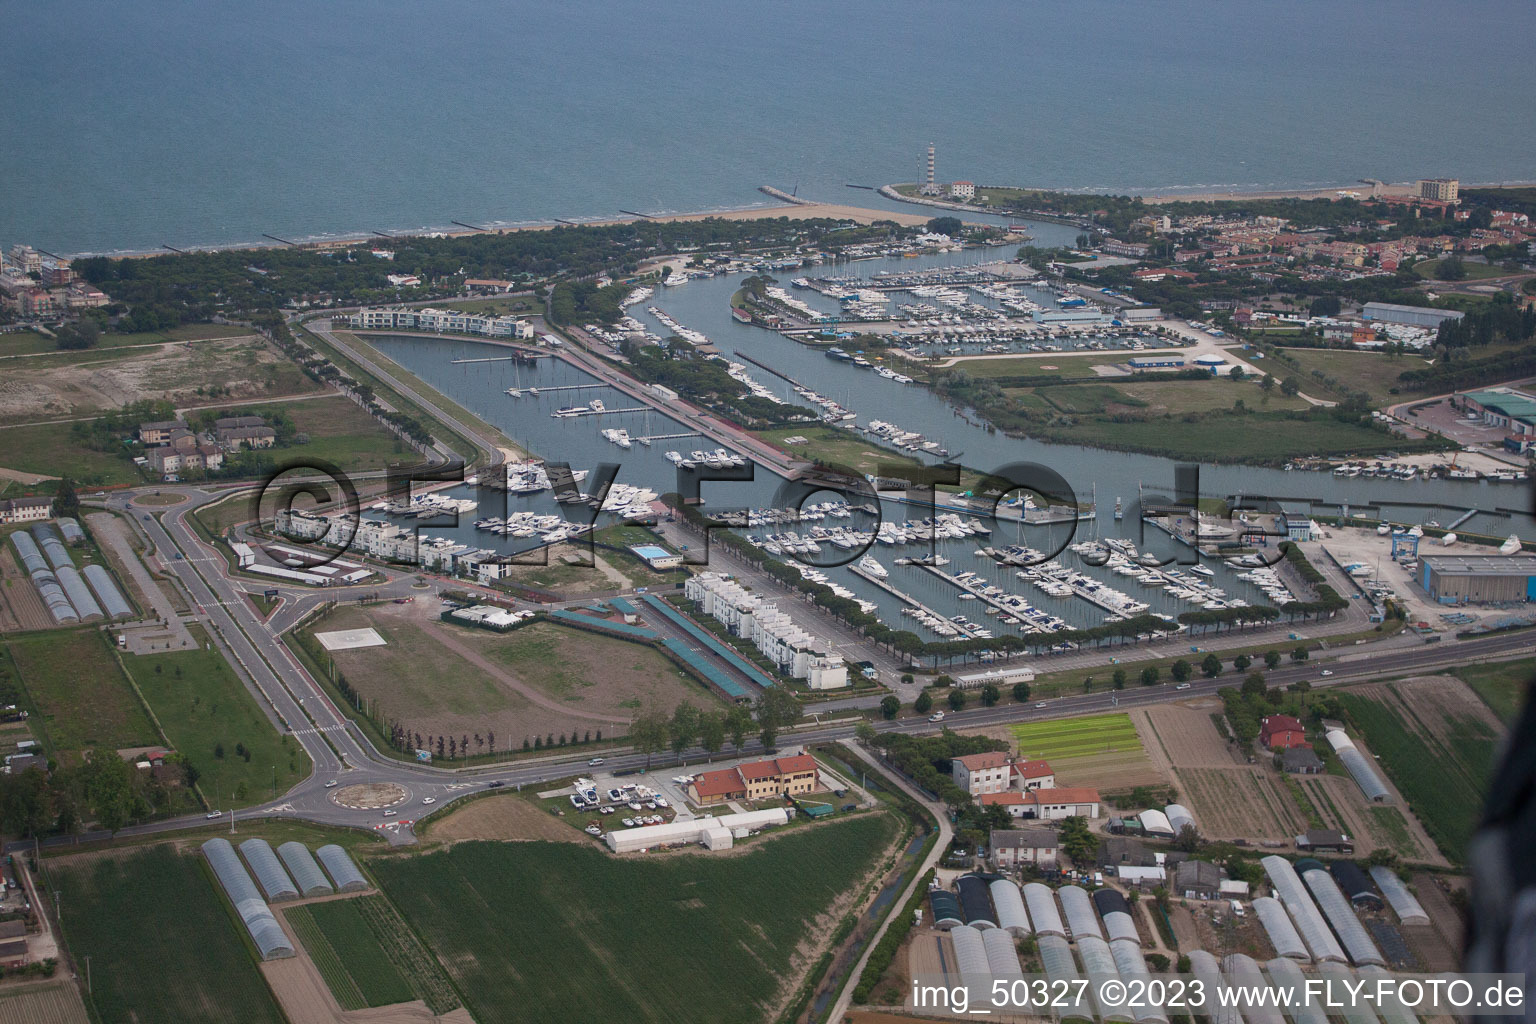 Jesolo in the state Veneto, Italy from above